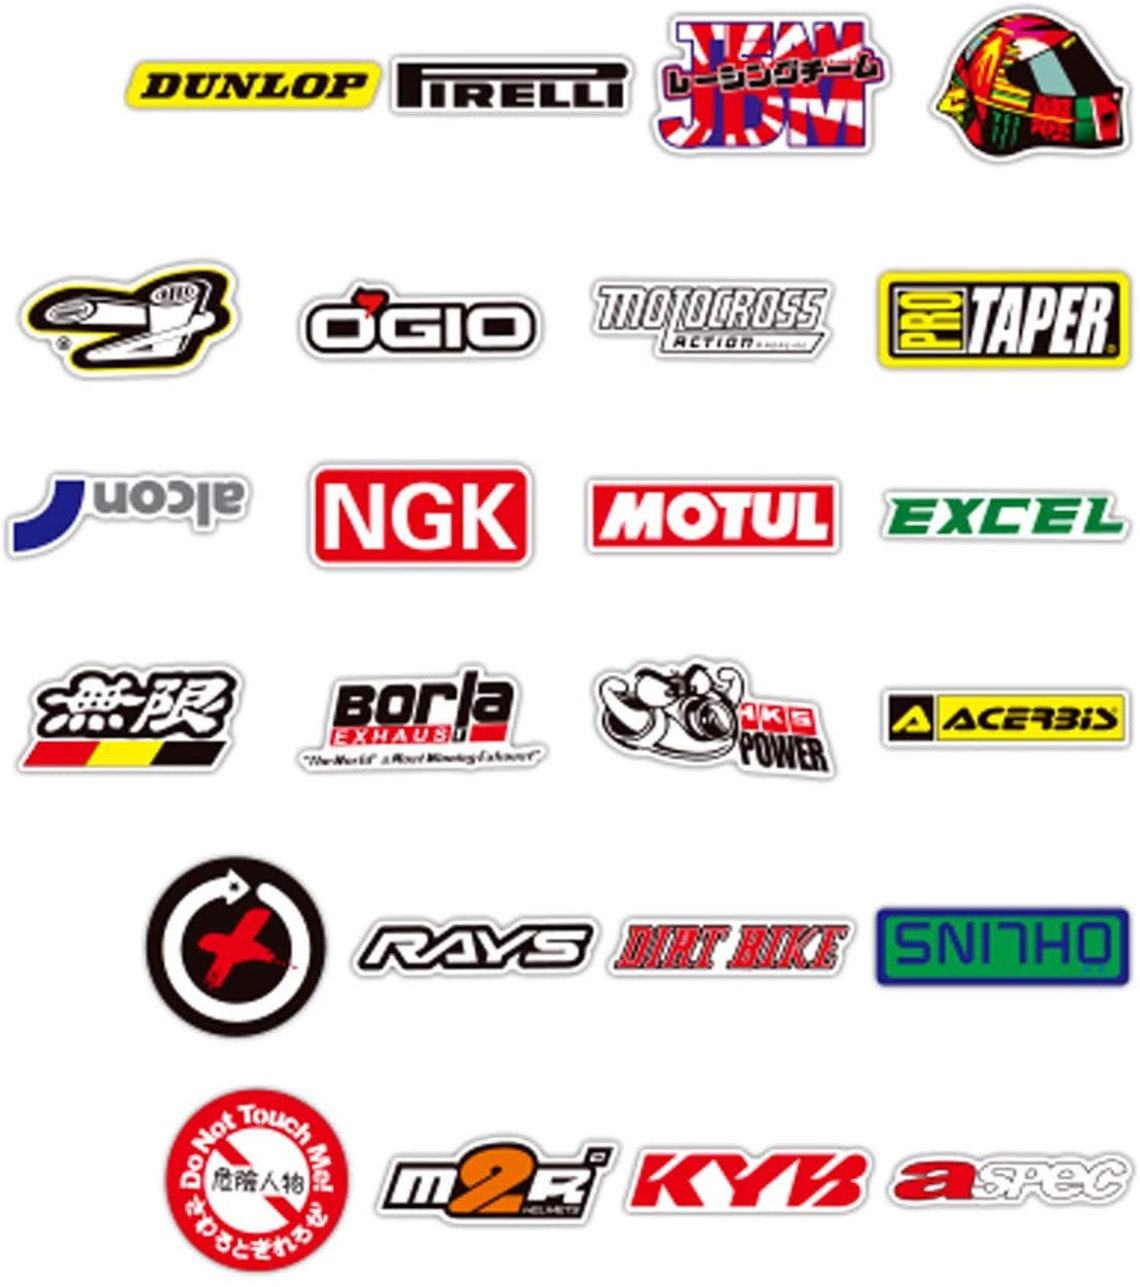 100 PCS Motorcycle brand logo stickers motorcycle racer | Etsy